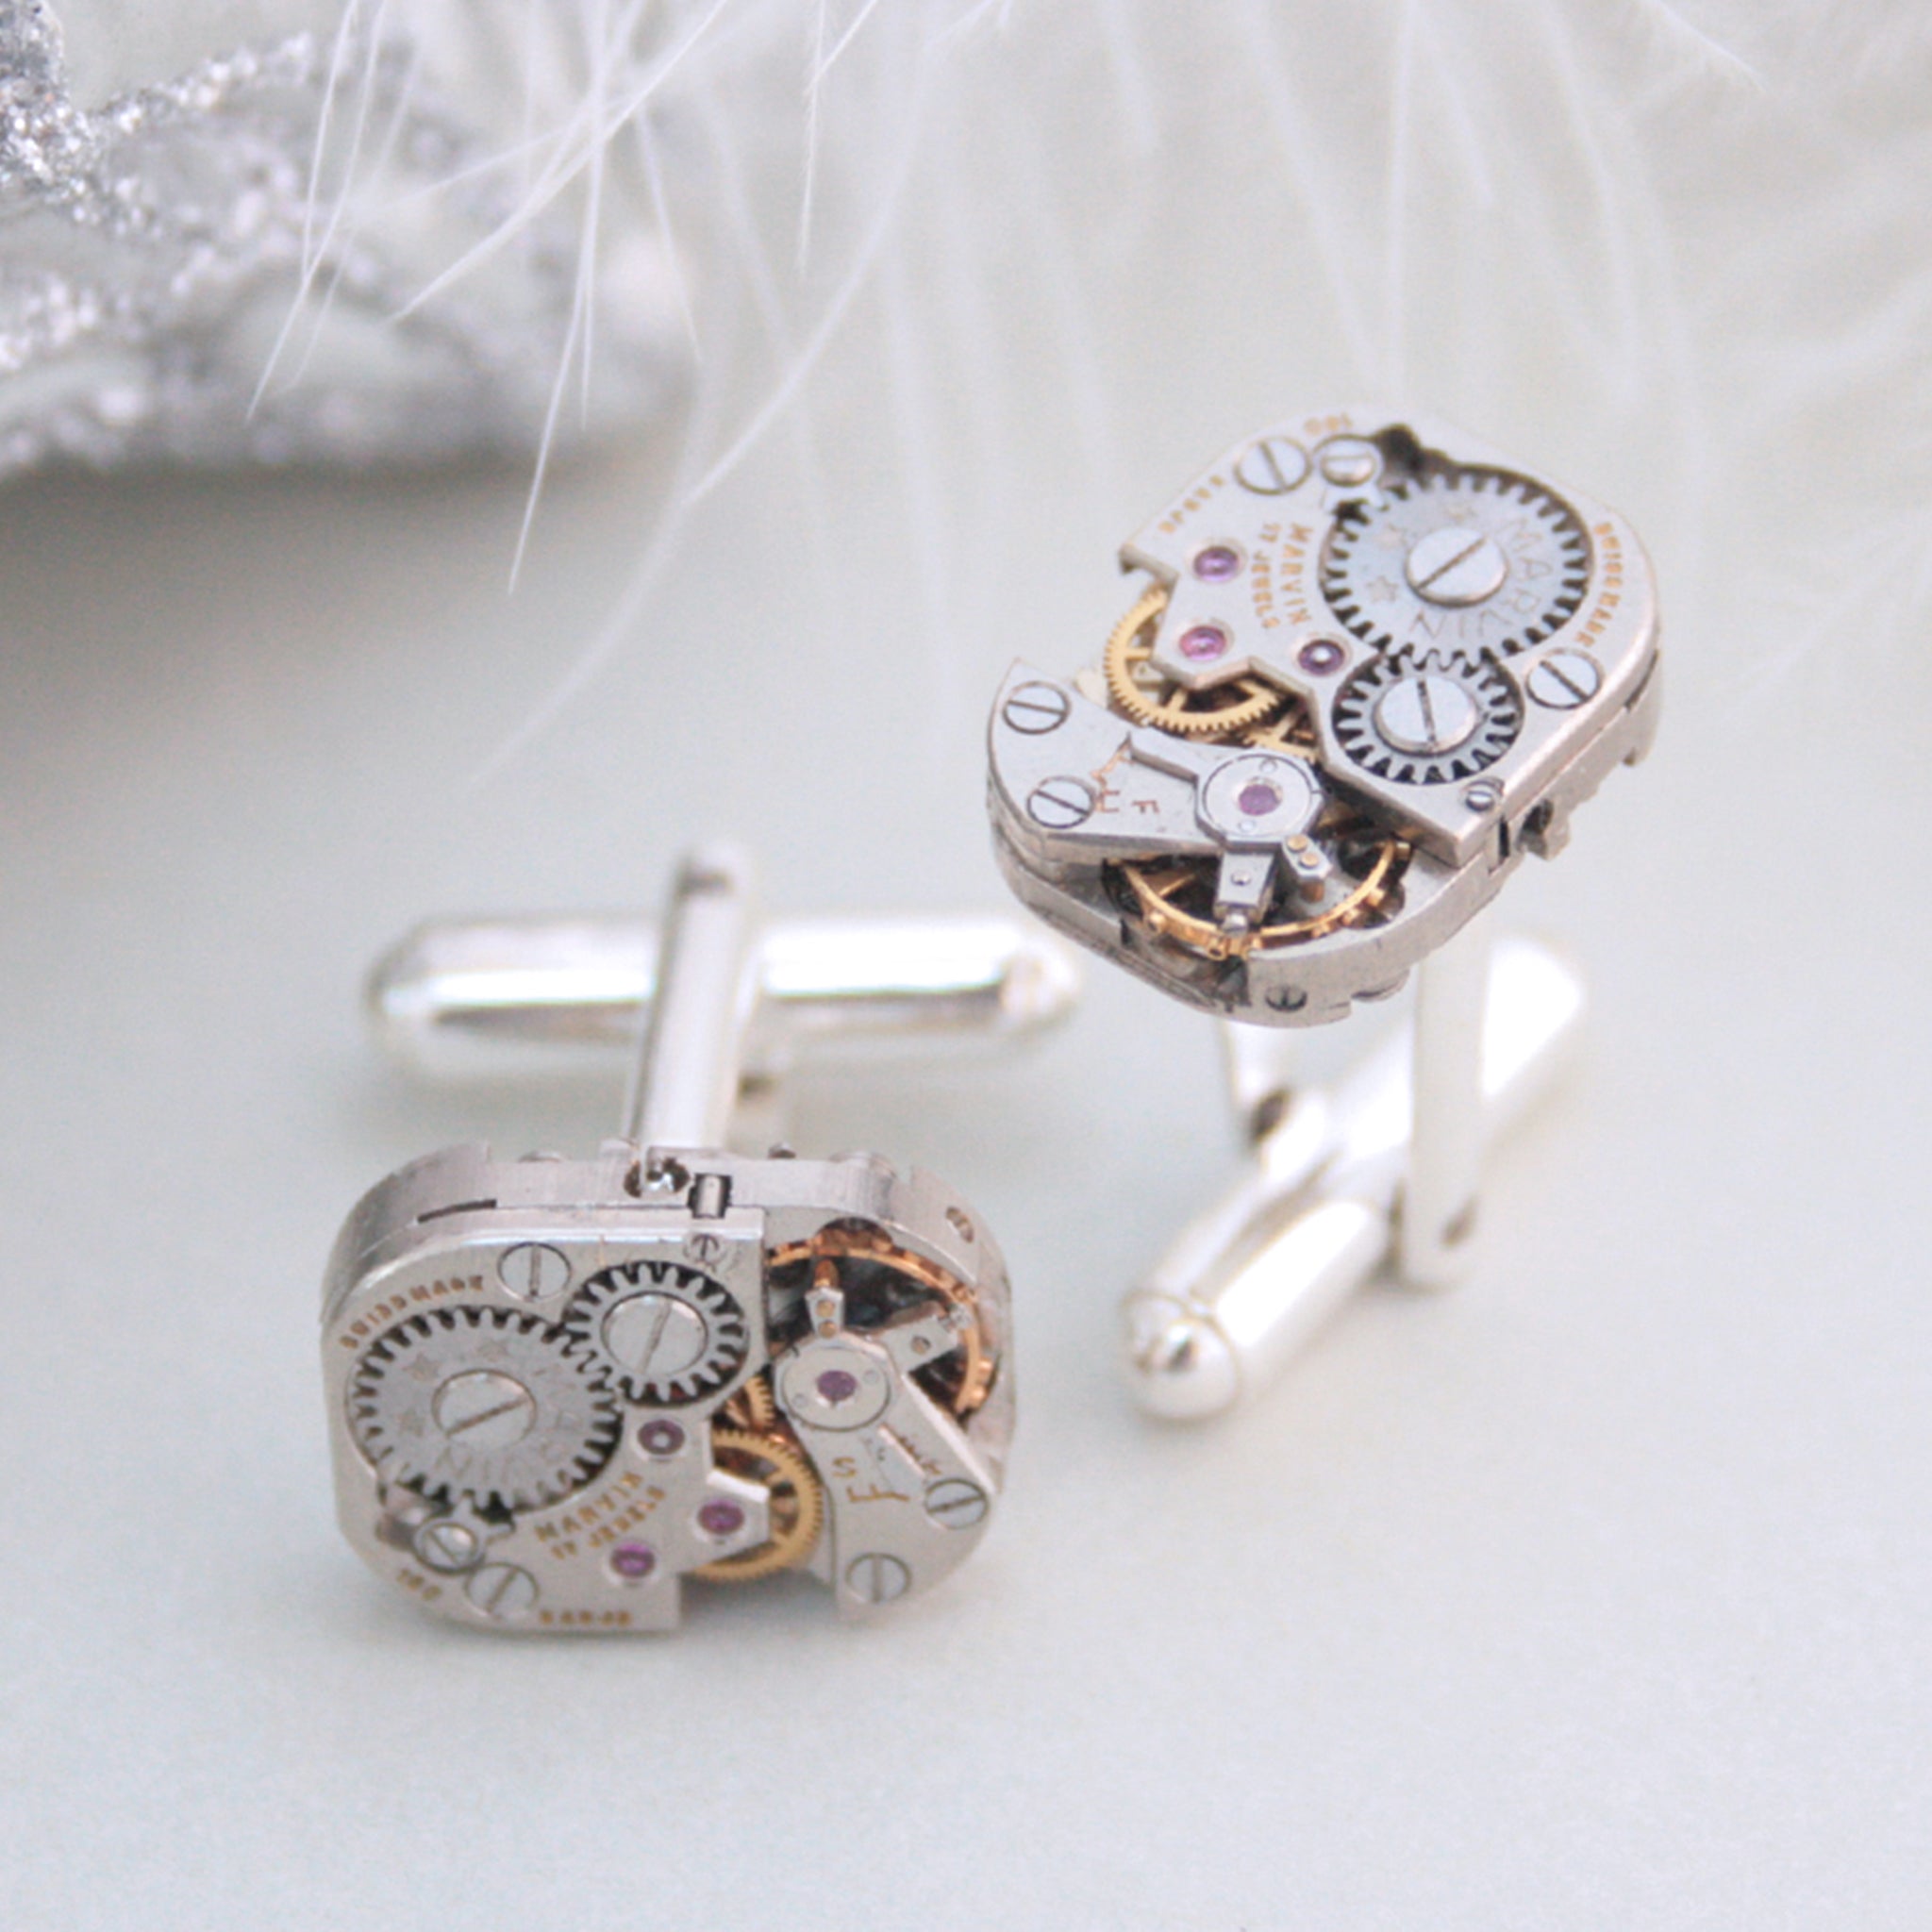 Cool Cufflinks for Watch Lovers